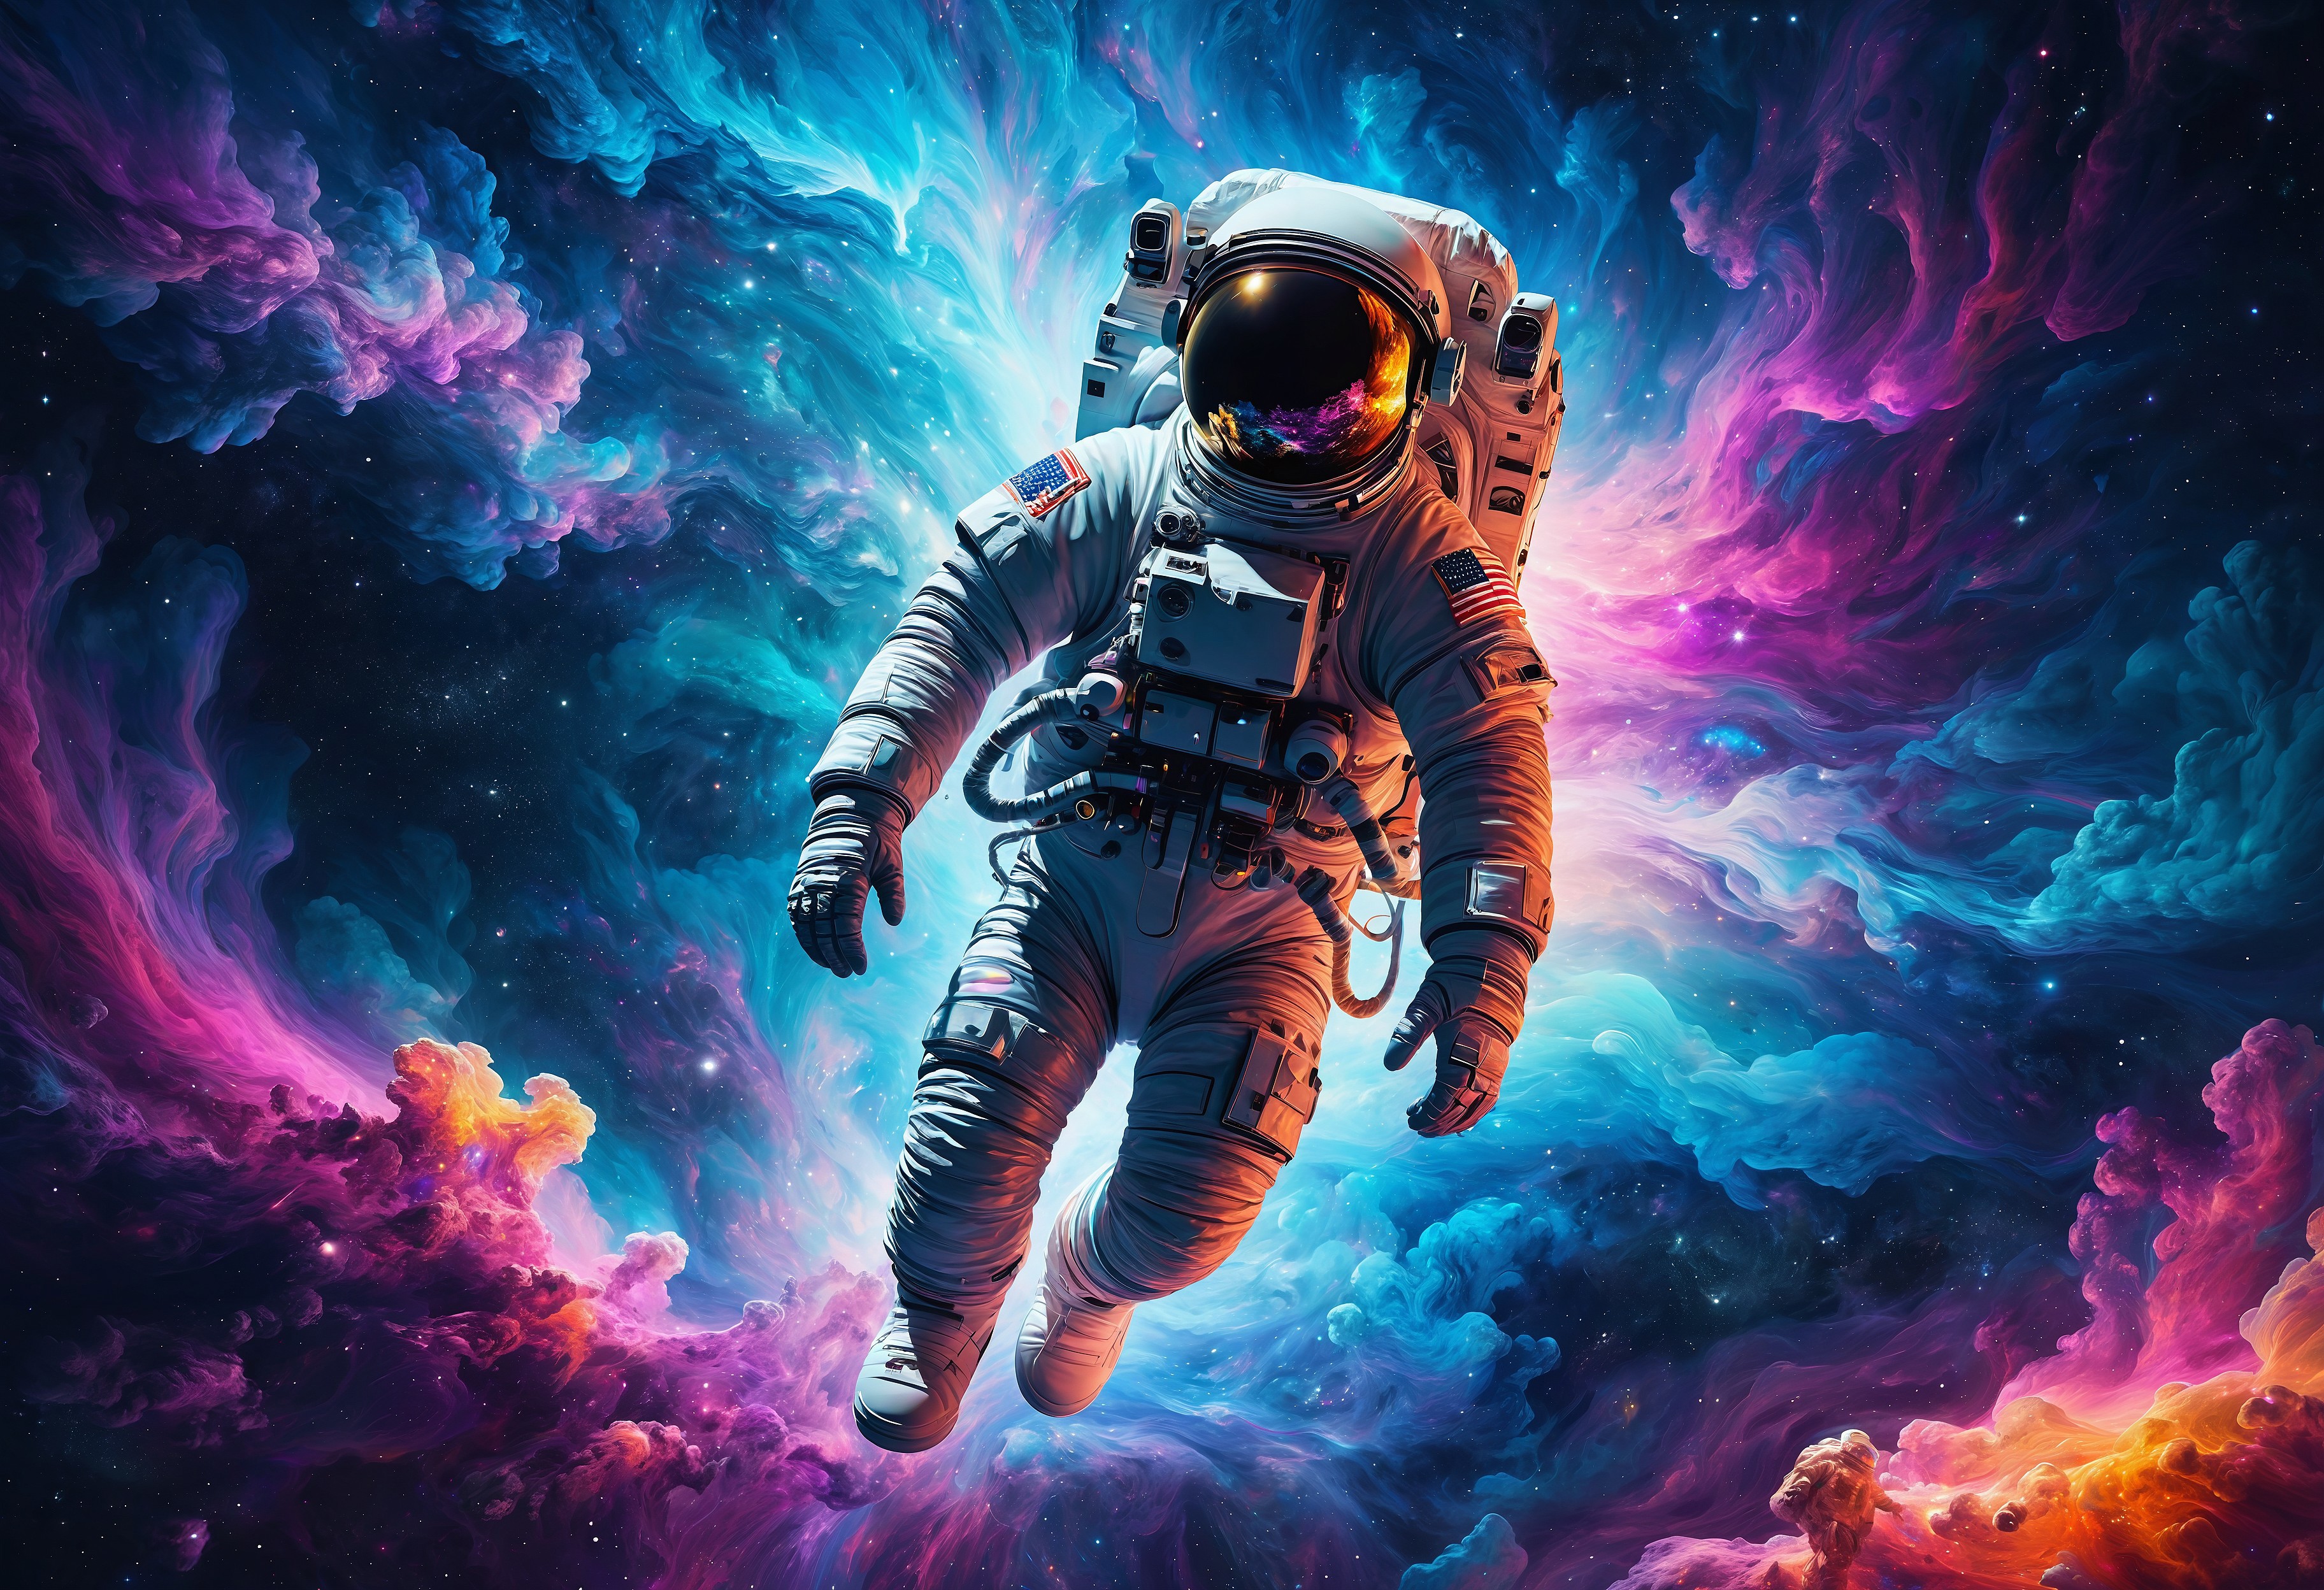 Astronaut in space suit flying through a colorful nebula.